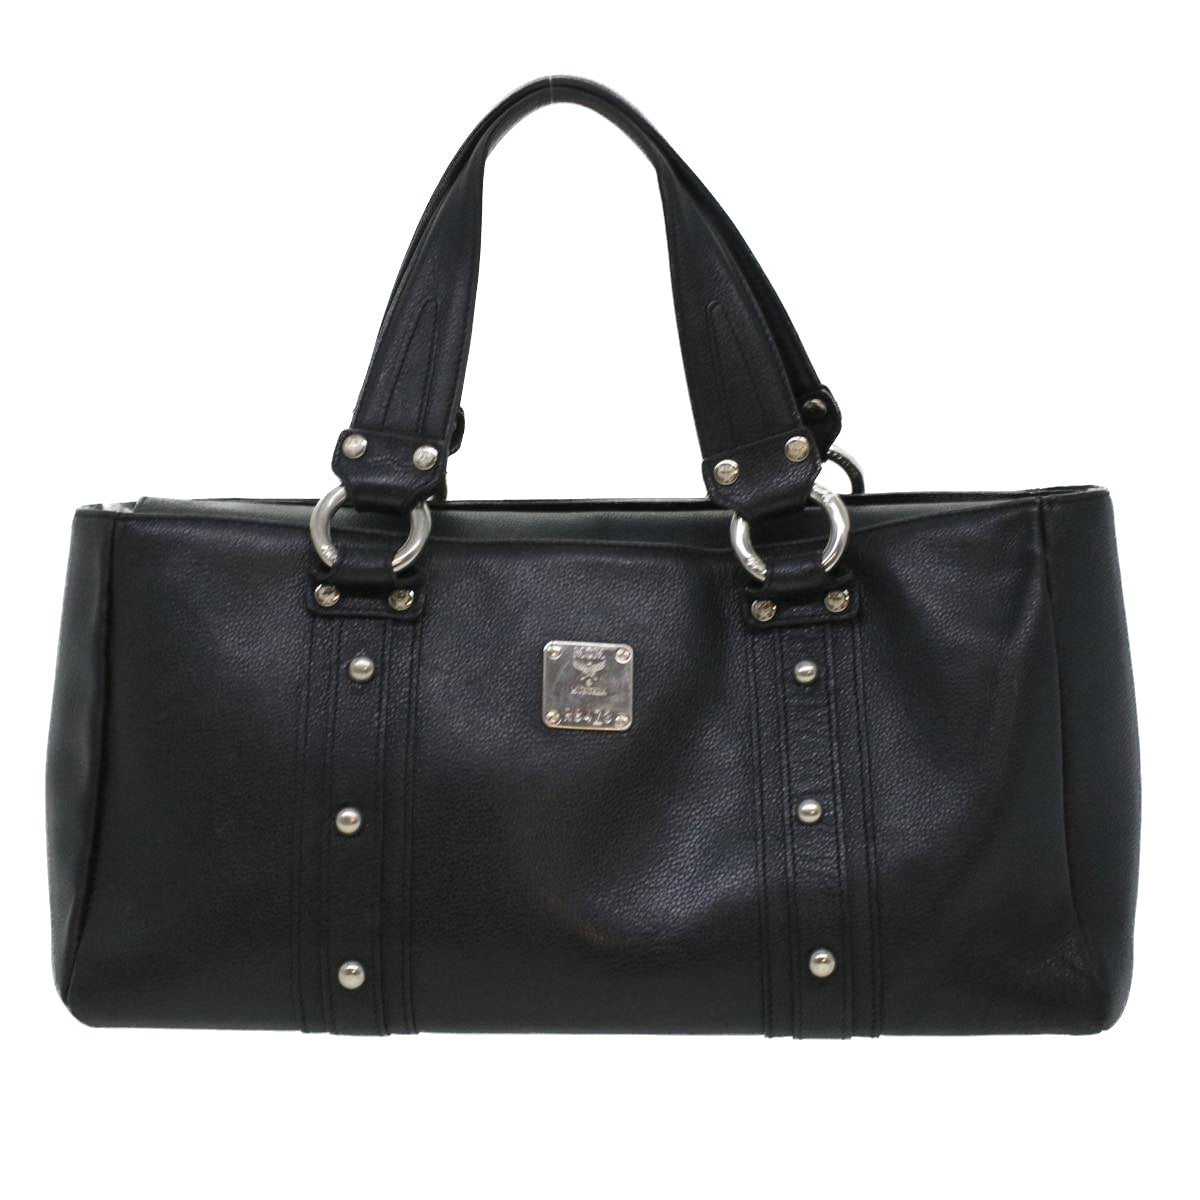 MCM Hand Bag Leather Black Auth bs5850